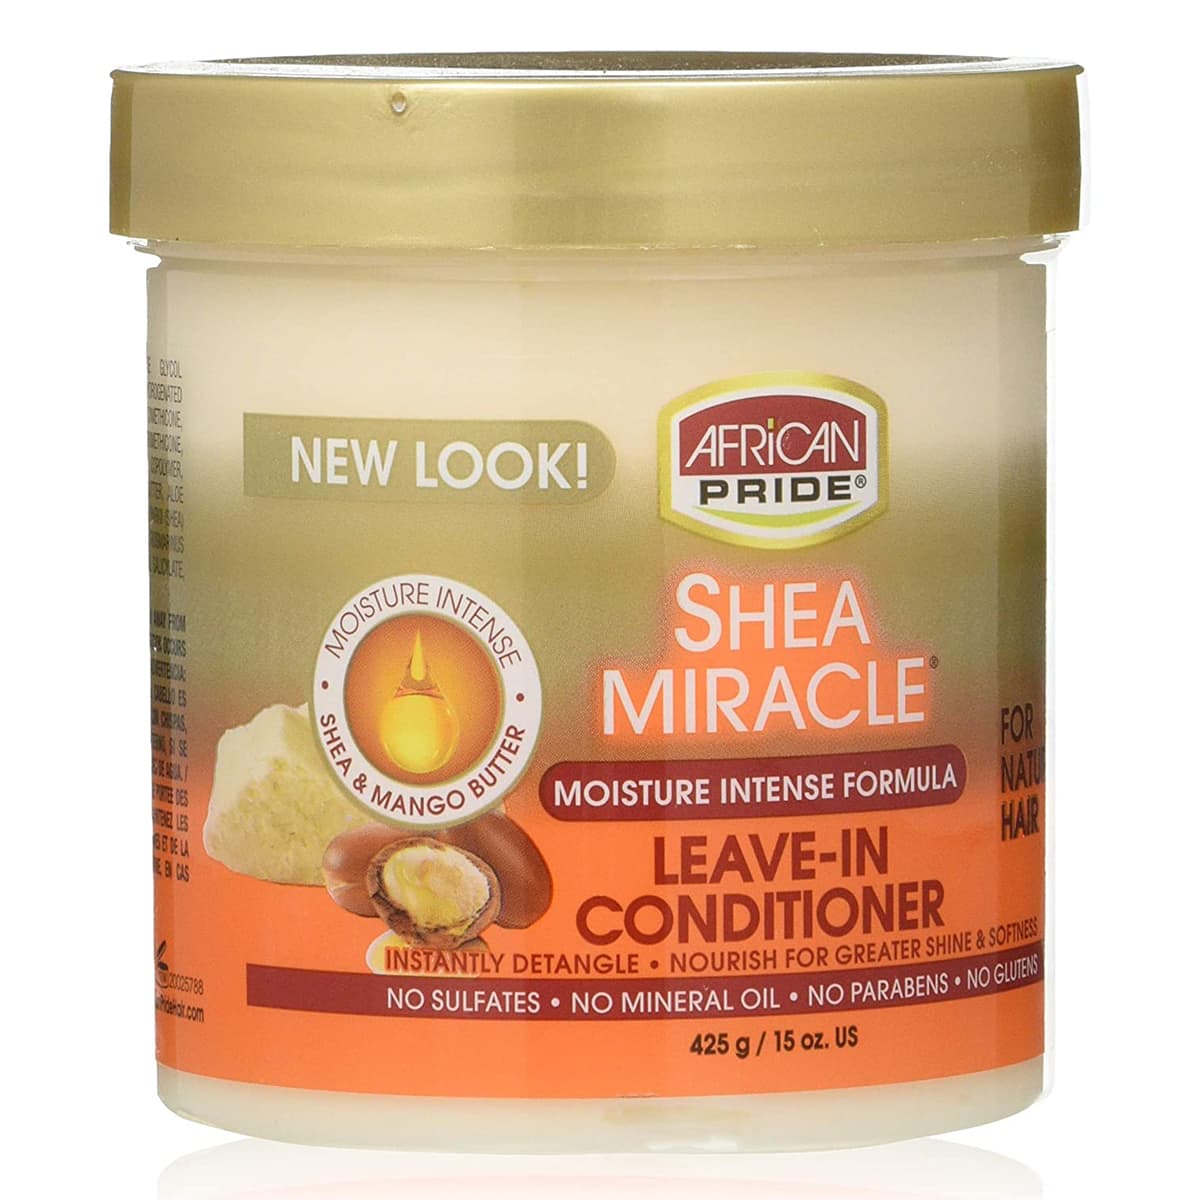 Buy African Pride Shea Butter Miracle Leave-in Conditioner - 425 gm